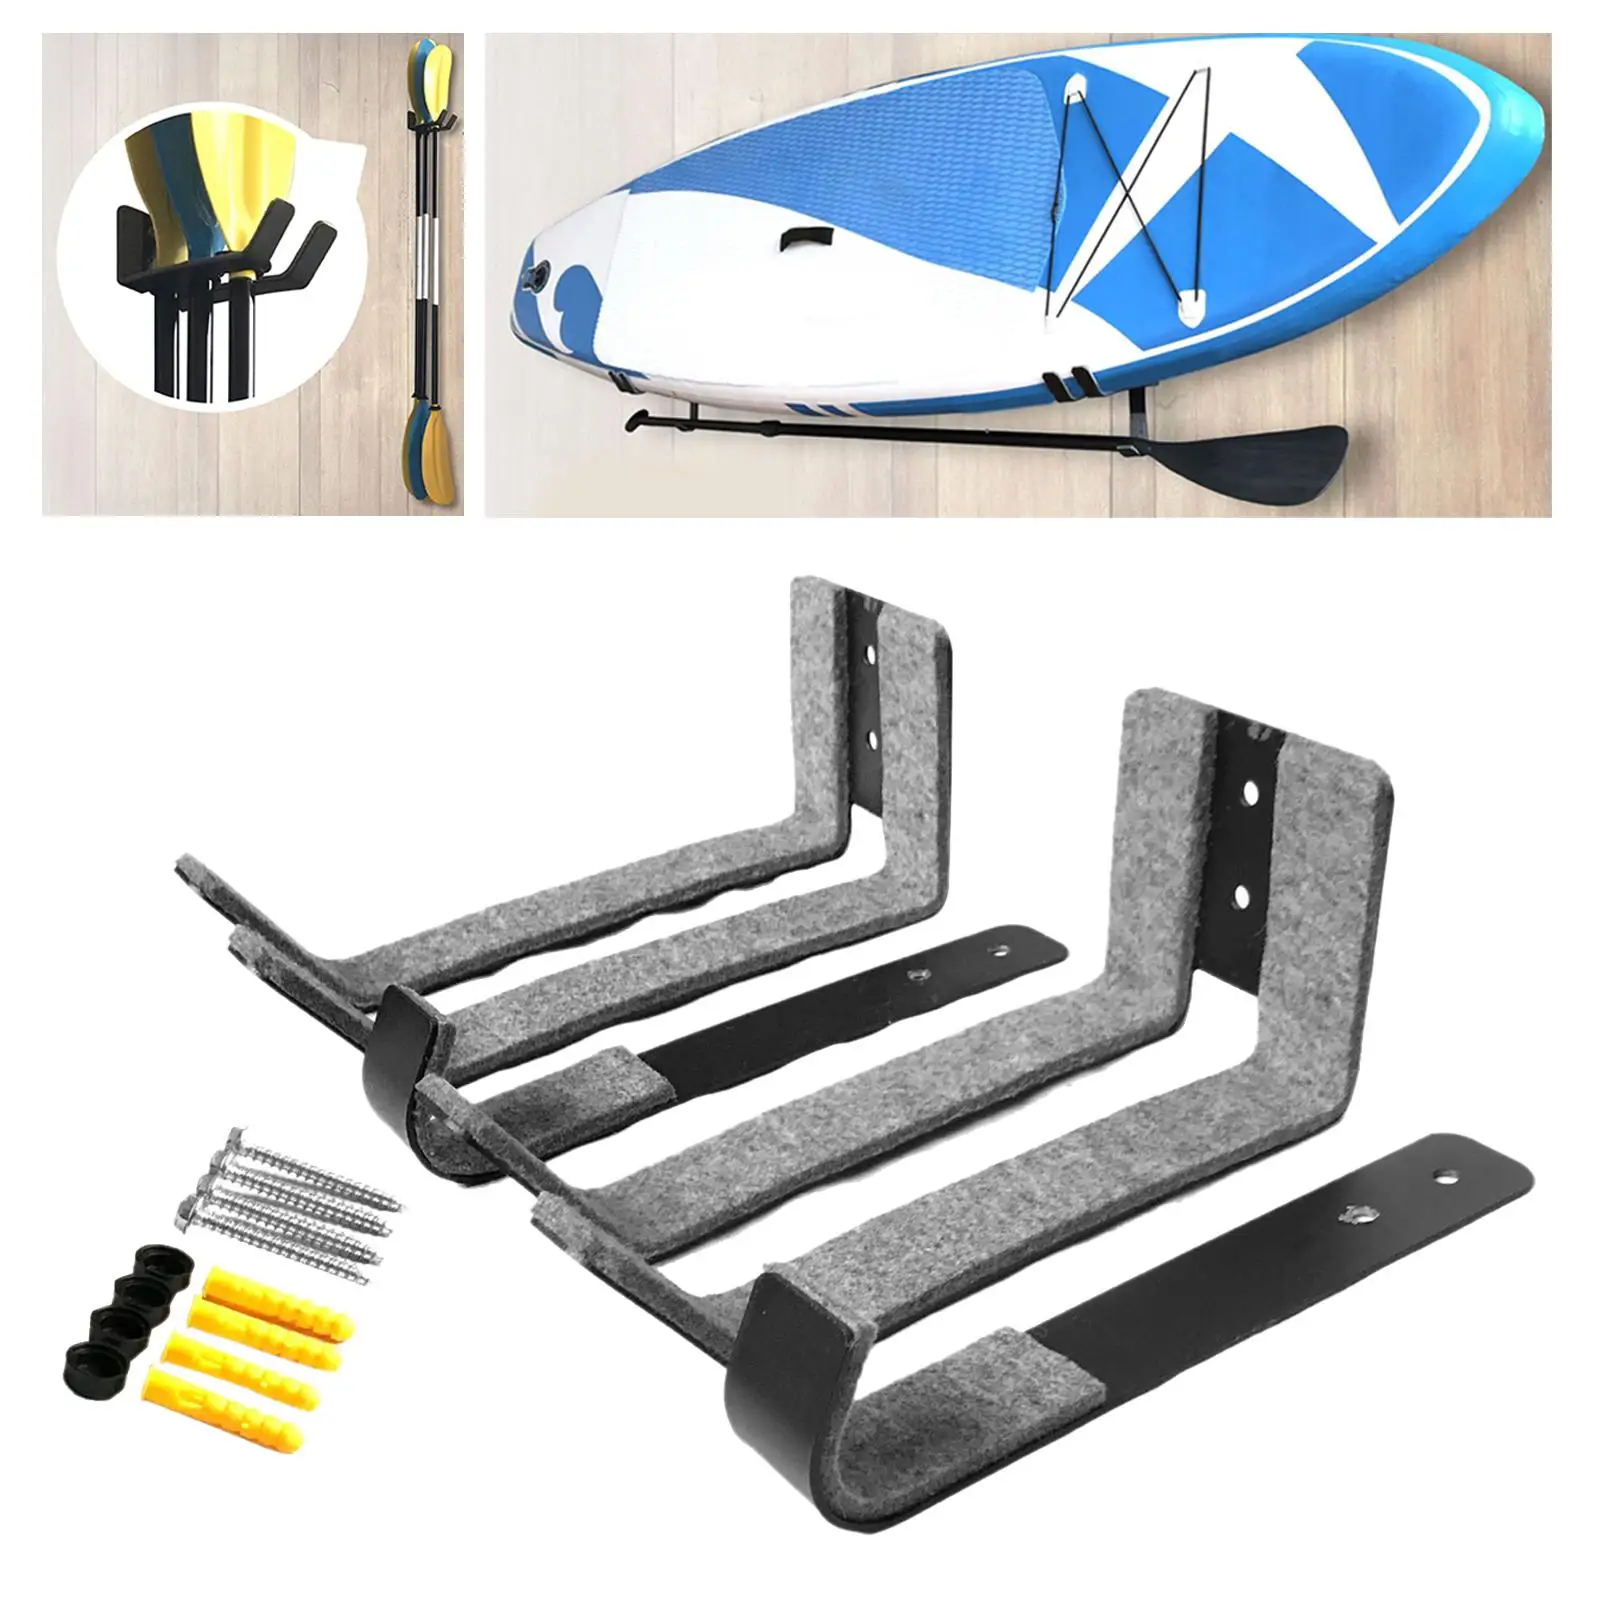 Metal Surf Board Rack Wall Display   Indoors and Outdoors with Foam